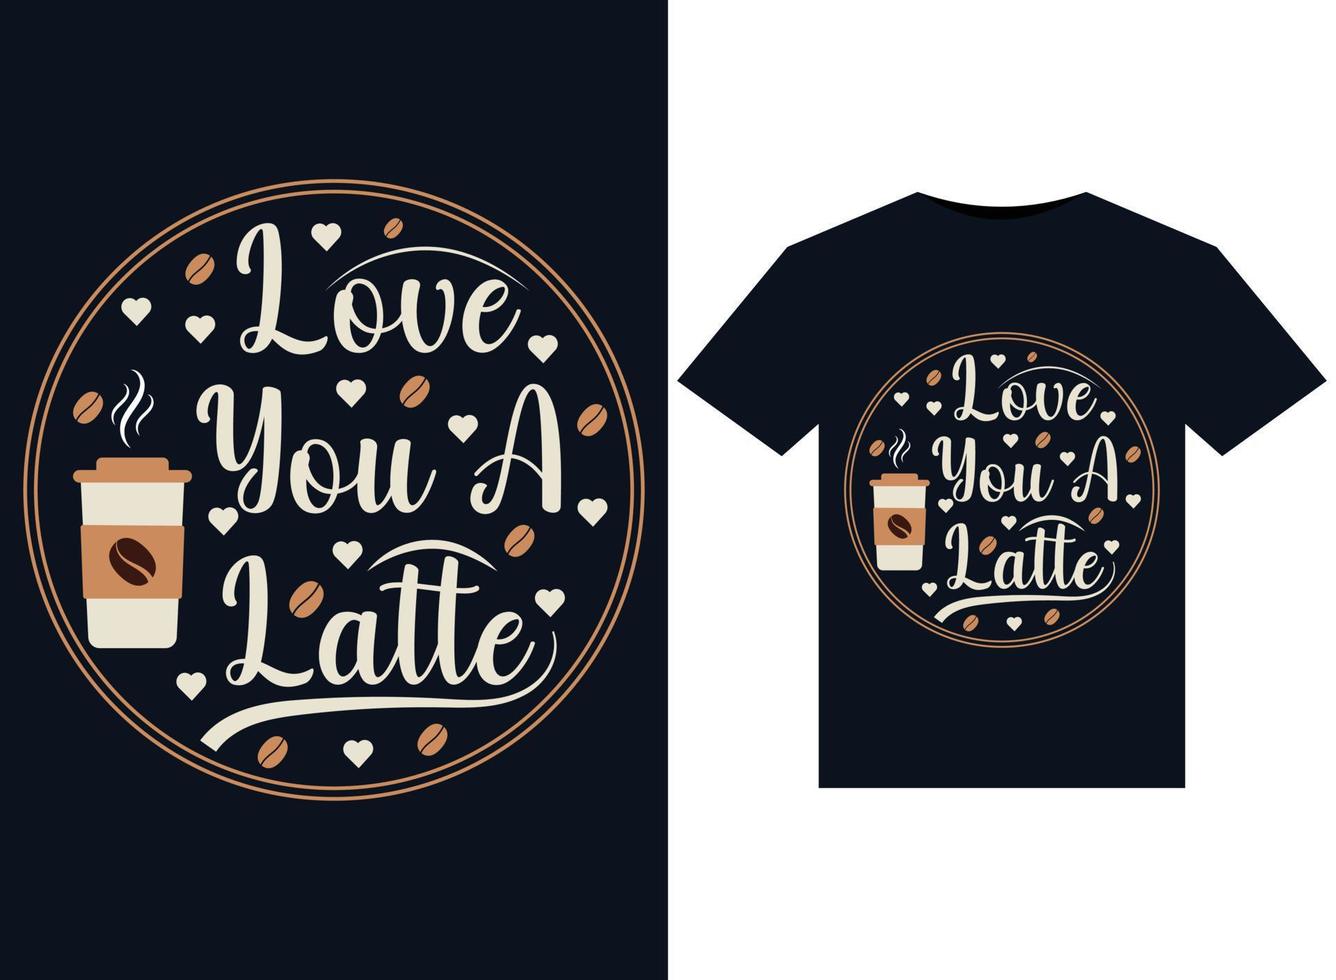 Love You A Latte illustrations for print-ready T-Shirts design. vector